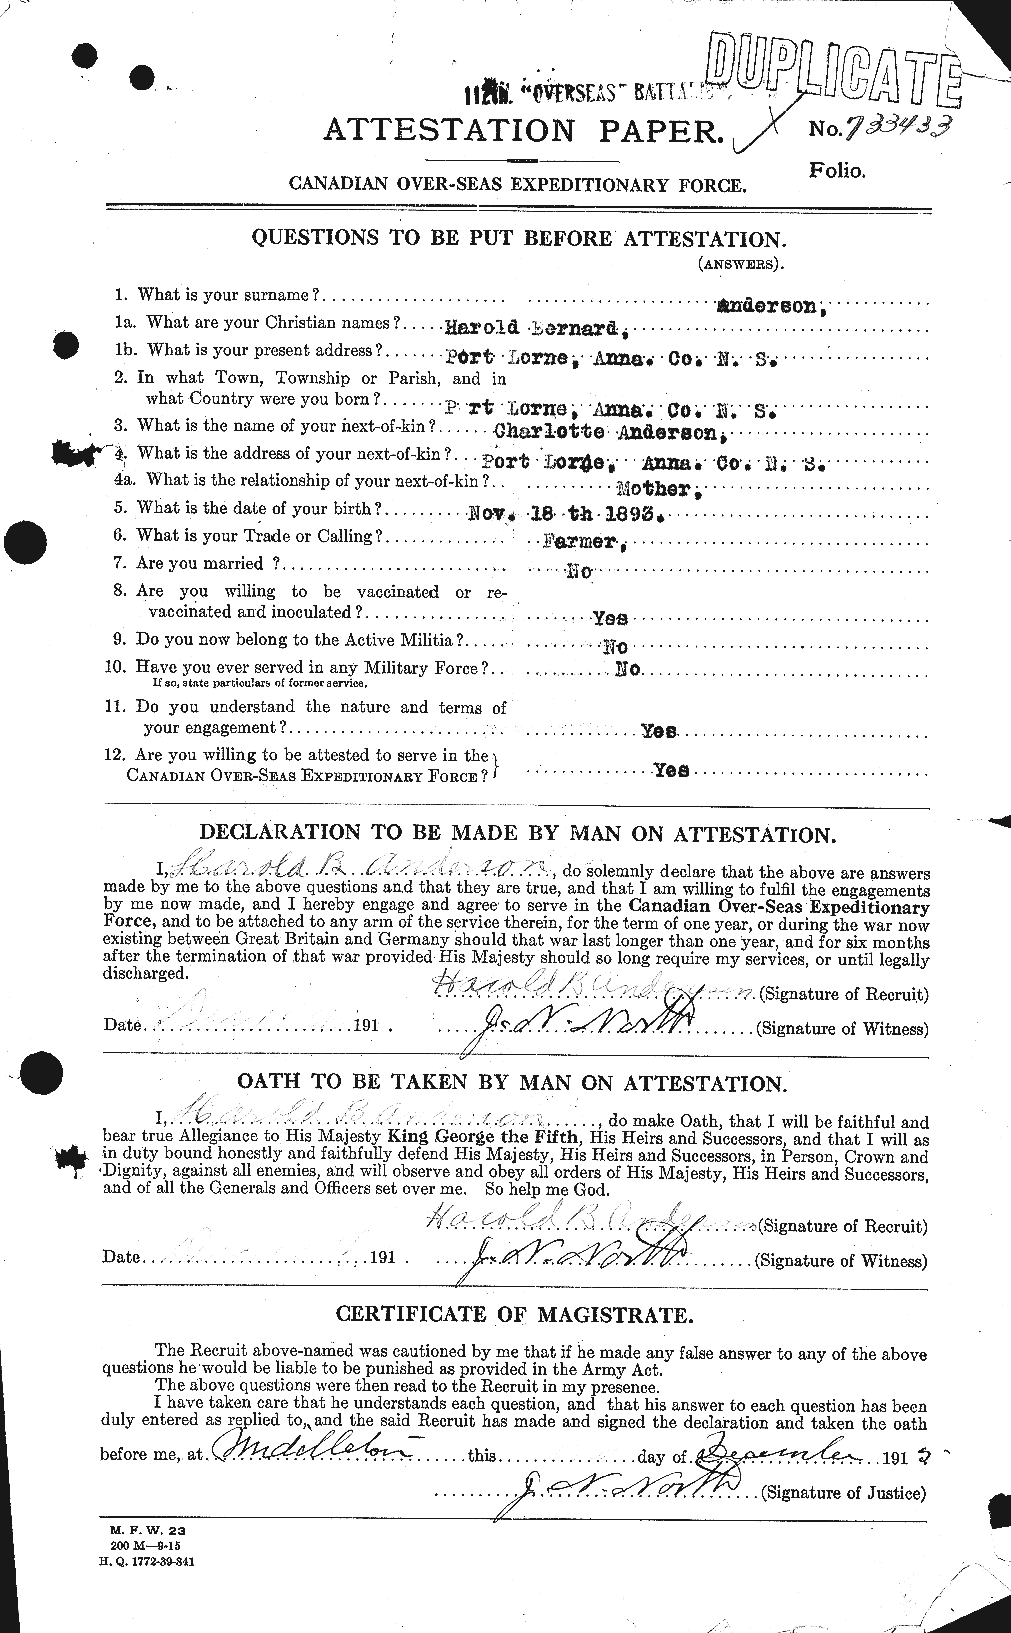 Personnel Records of the First World War - CEF 213291a